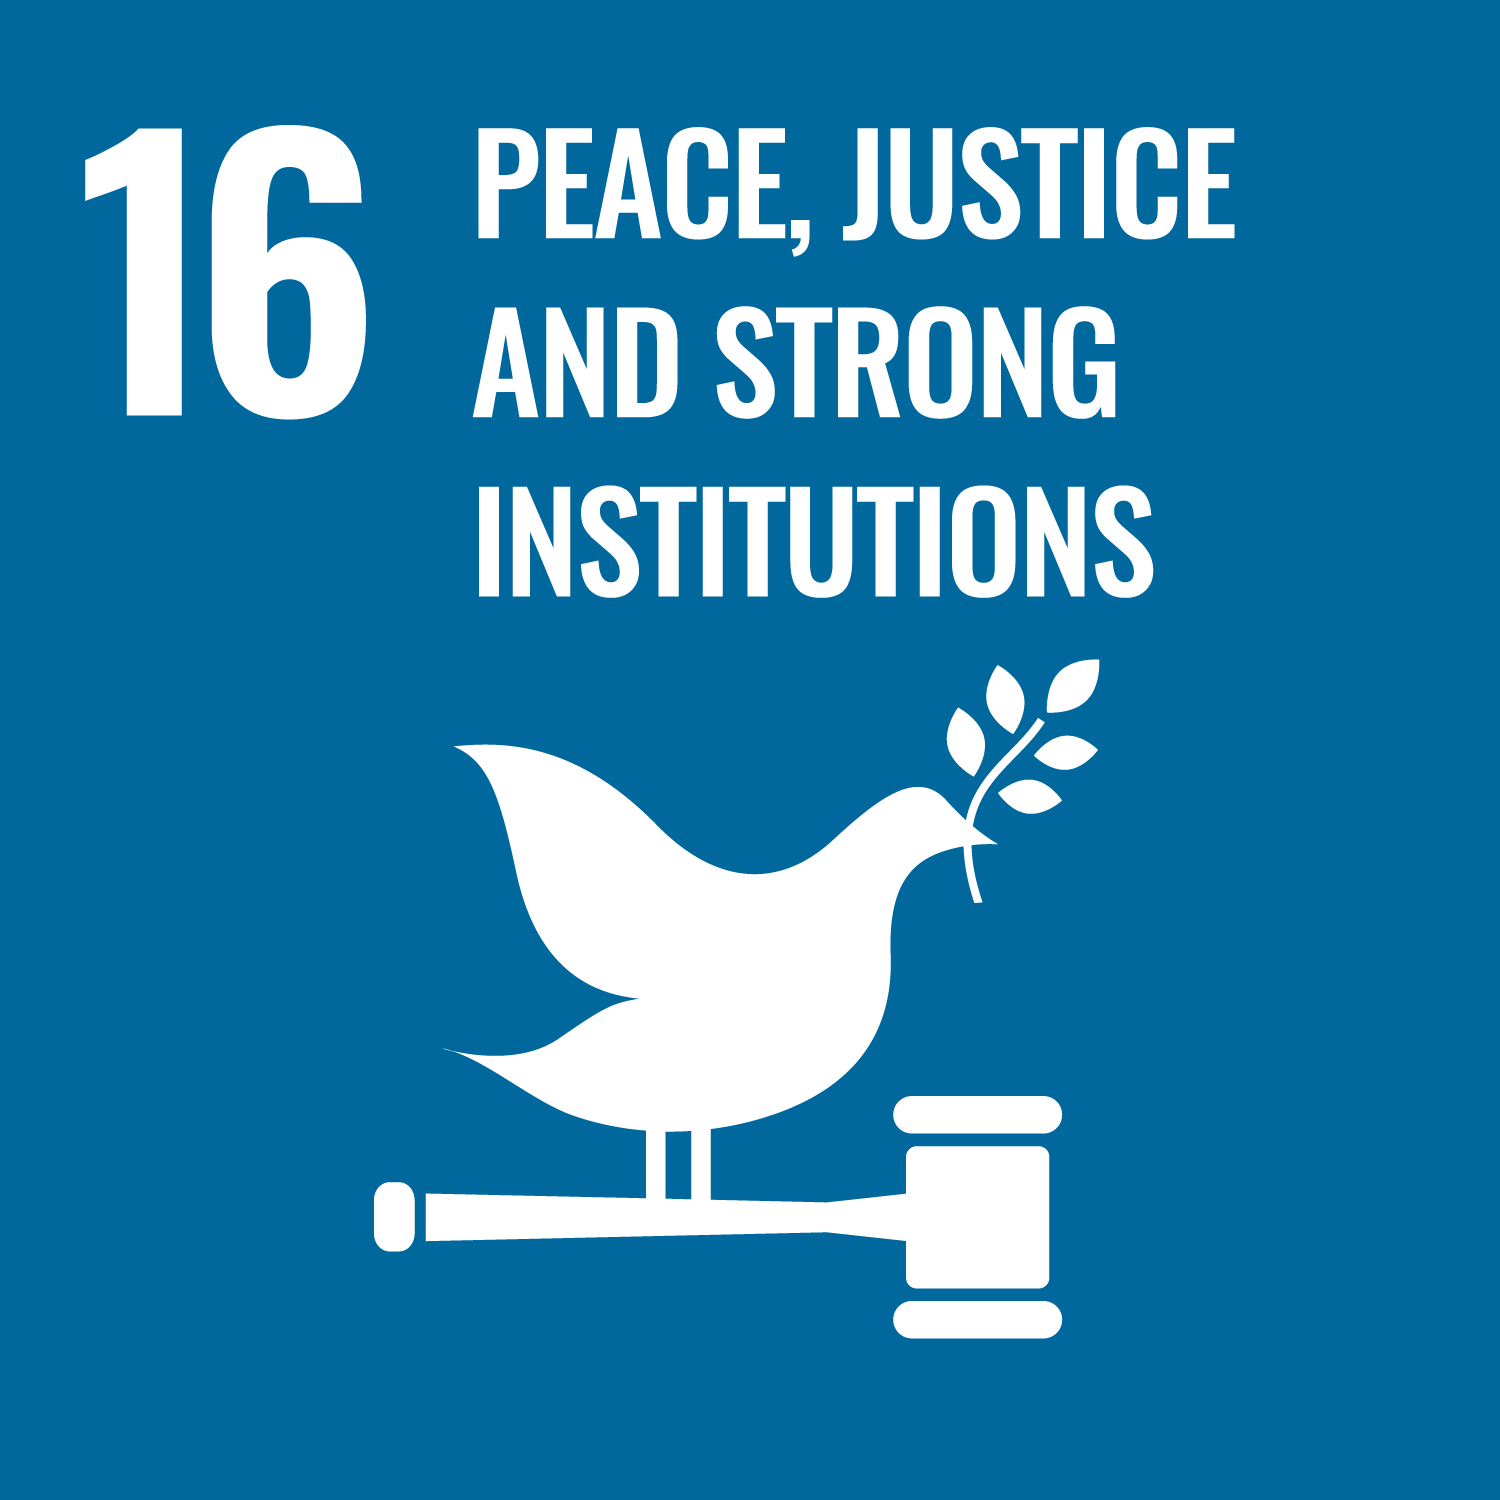 Peace, justice and effective institutions